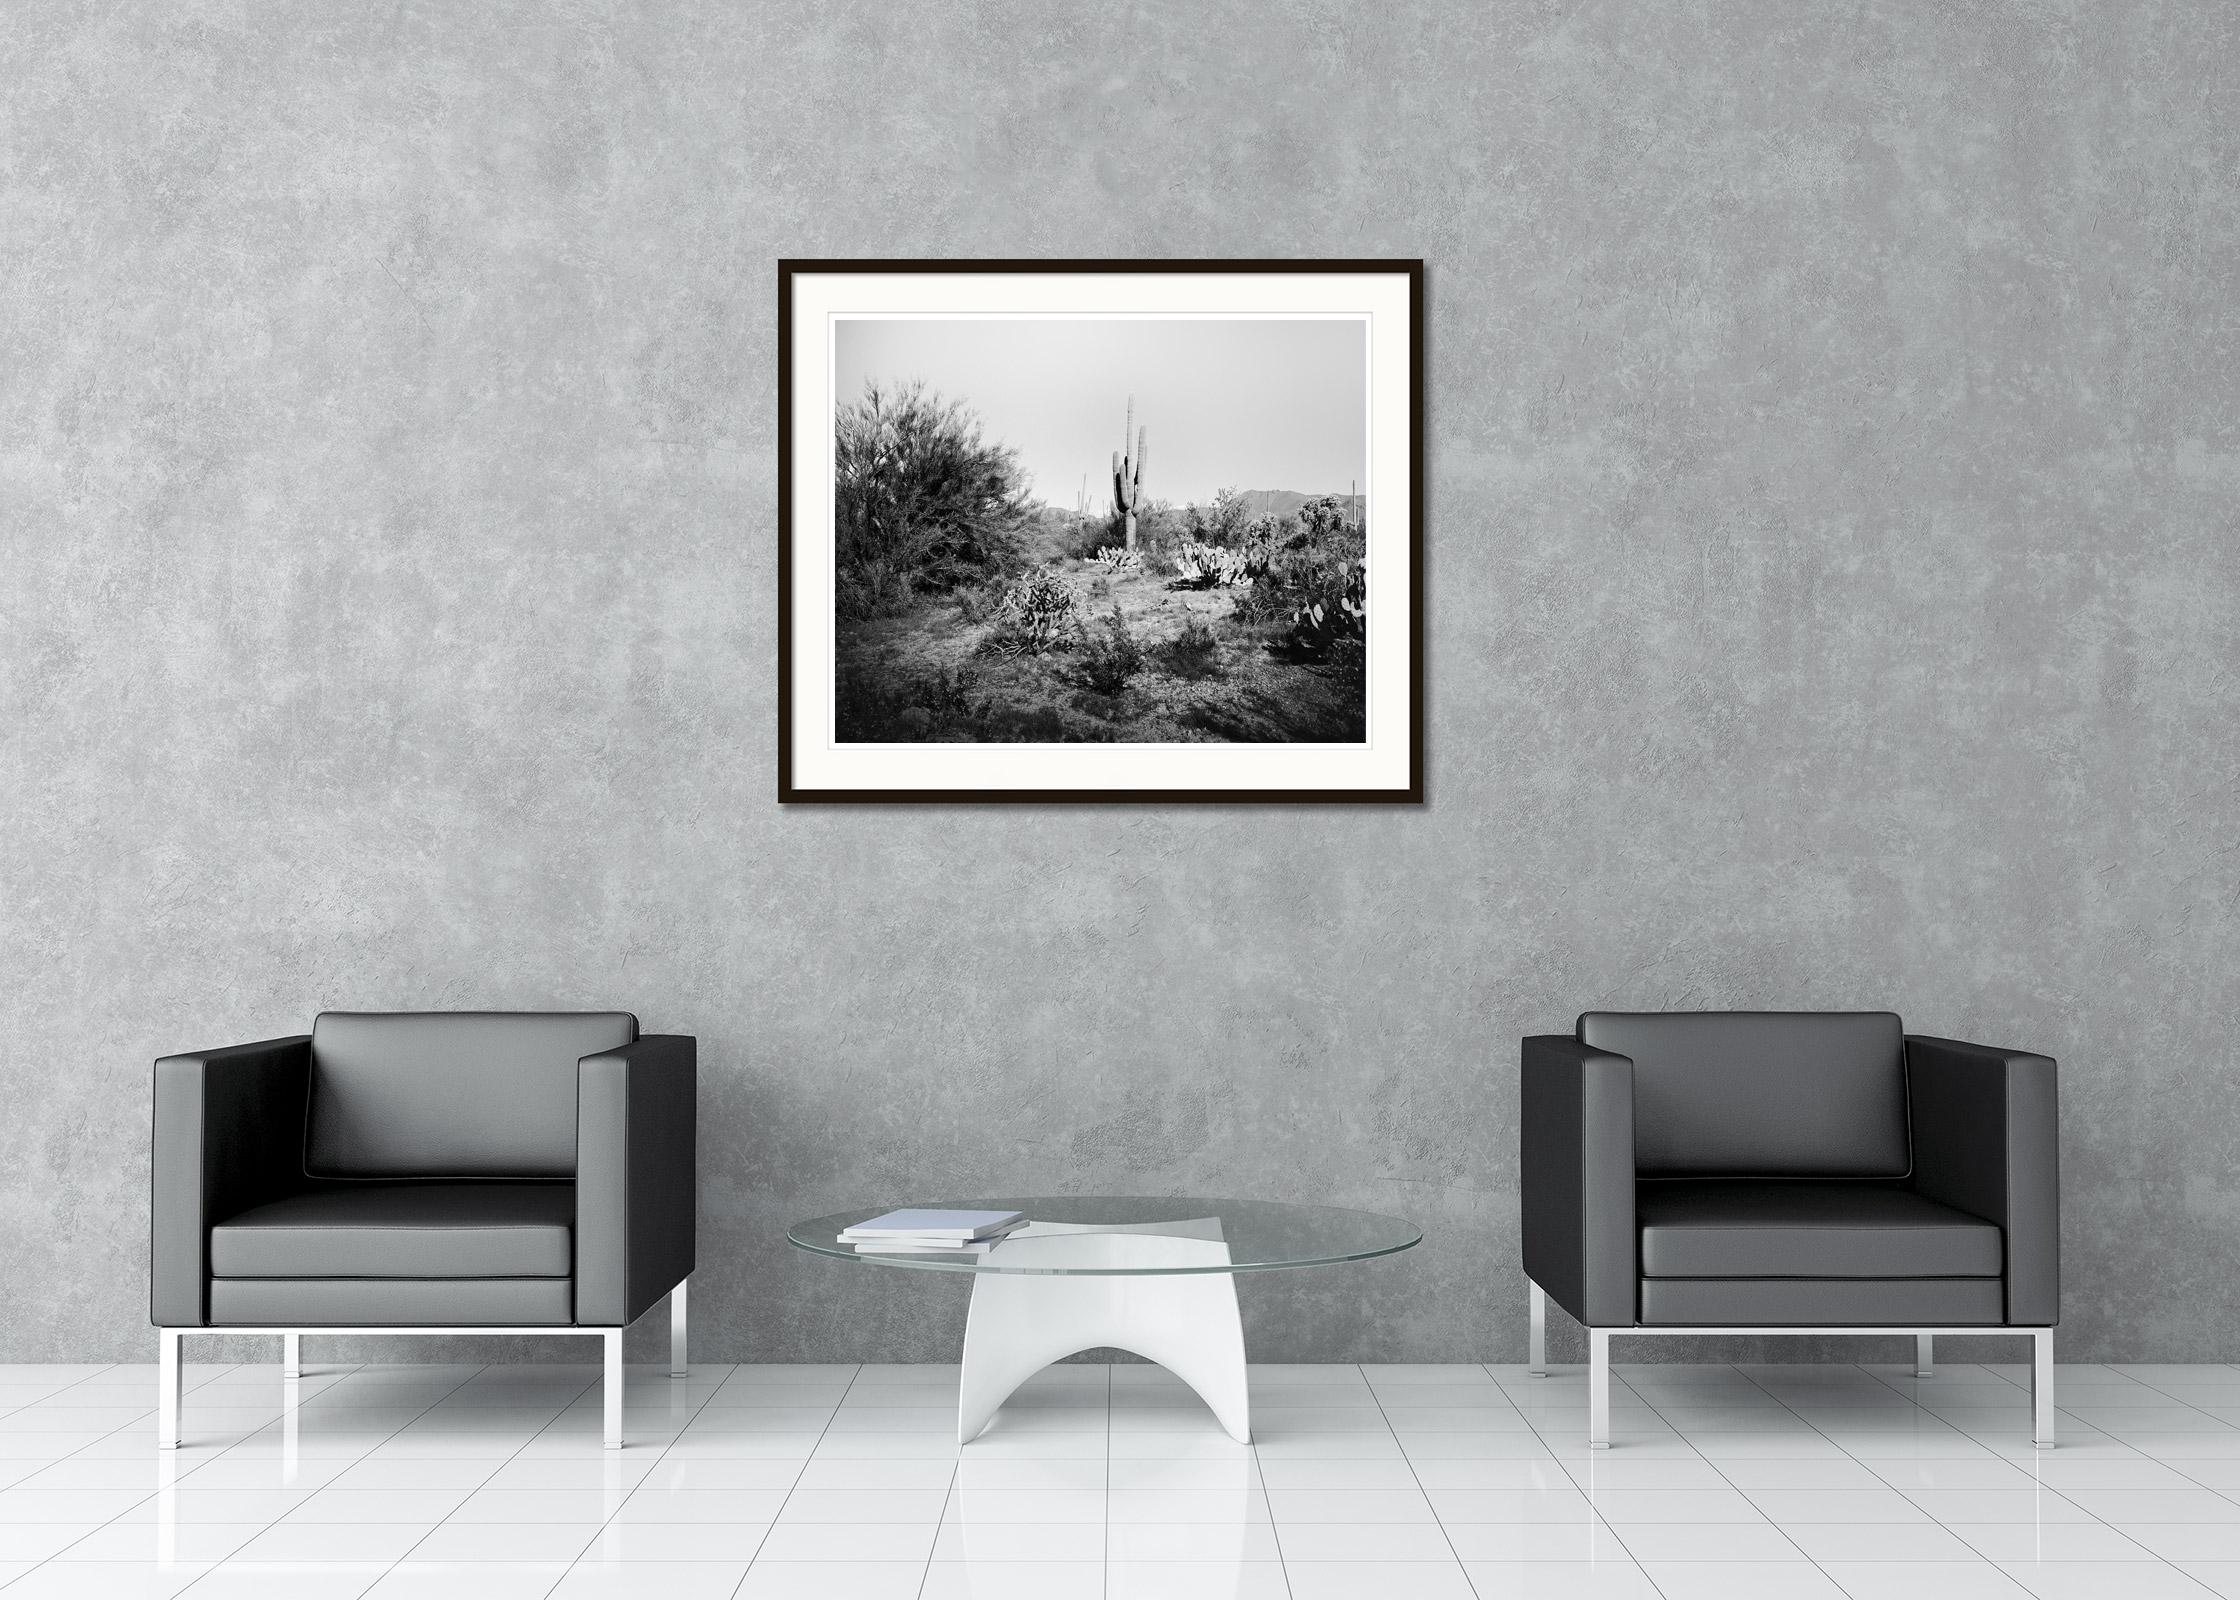 Black and white fine art landscape photography. Saguaro Cactus National Park, Desert, Arizona, USA. Archival pigment ink print, edition of 9. Signed, titled, dated and numbered by artist. Certificate of authenticity included. Printed with 4cm white